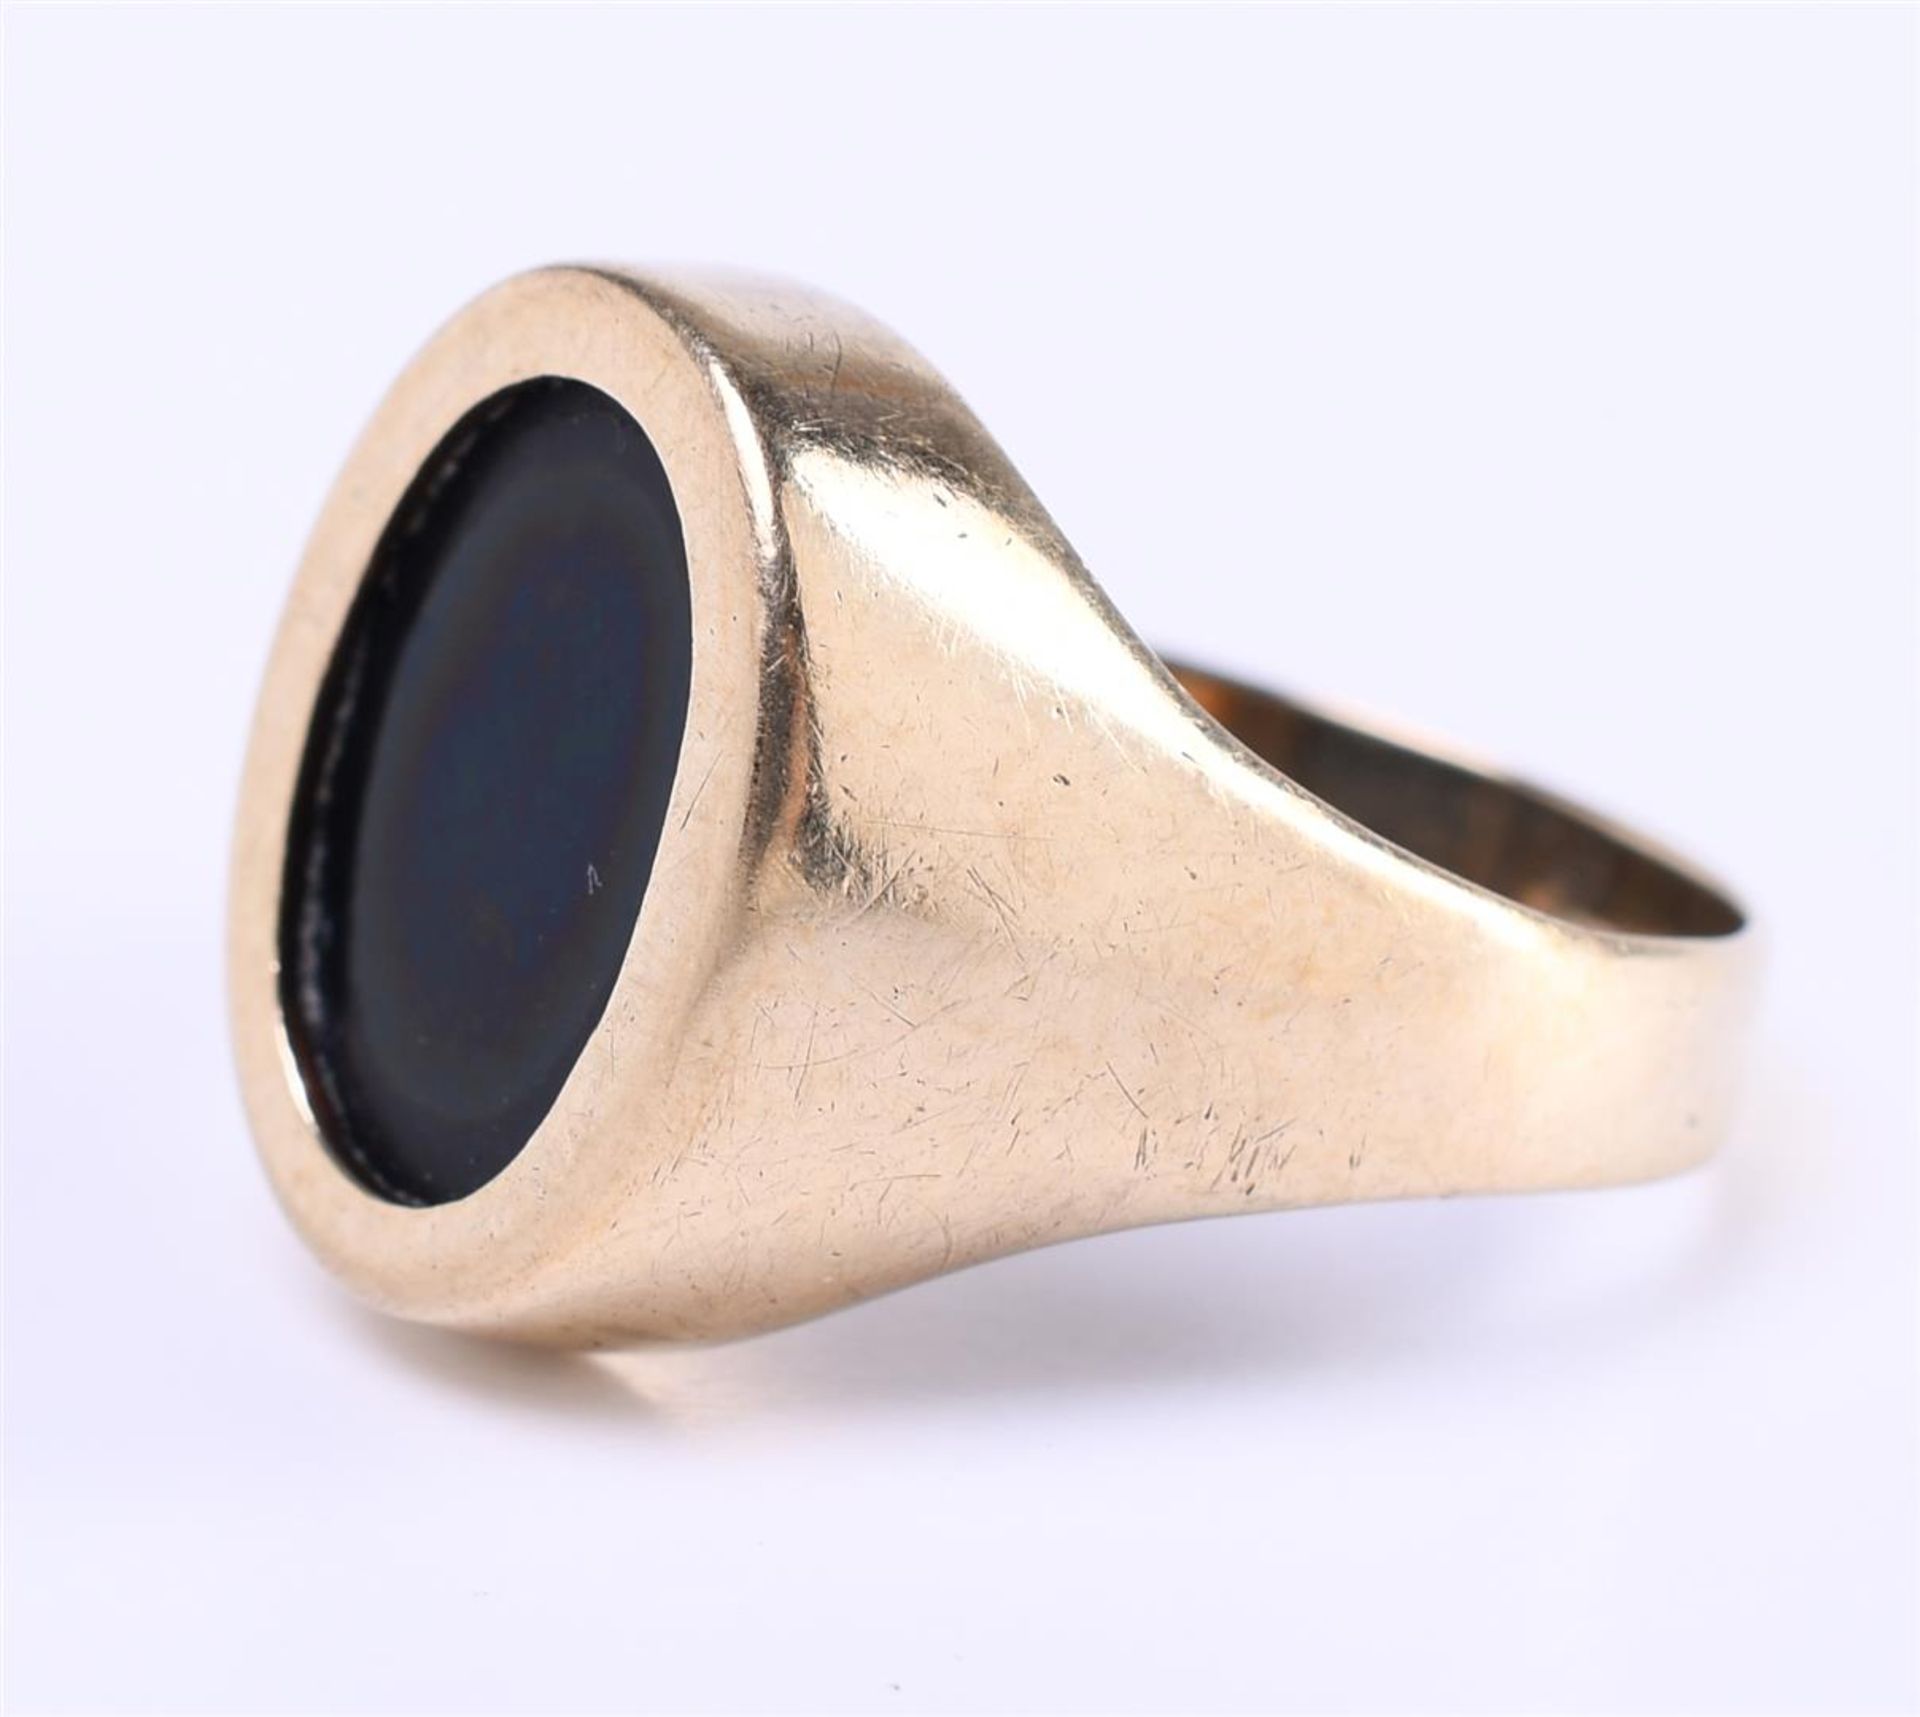 14 carat yellow gold men's signet ring. Set with an oval cut onyx stone of approx. 1.2 cm